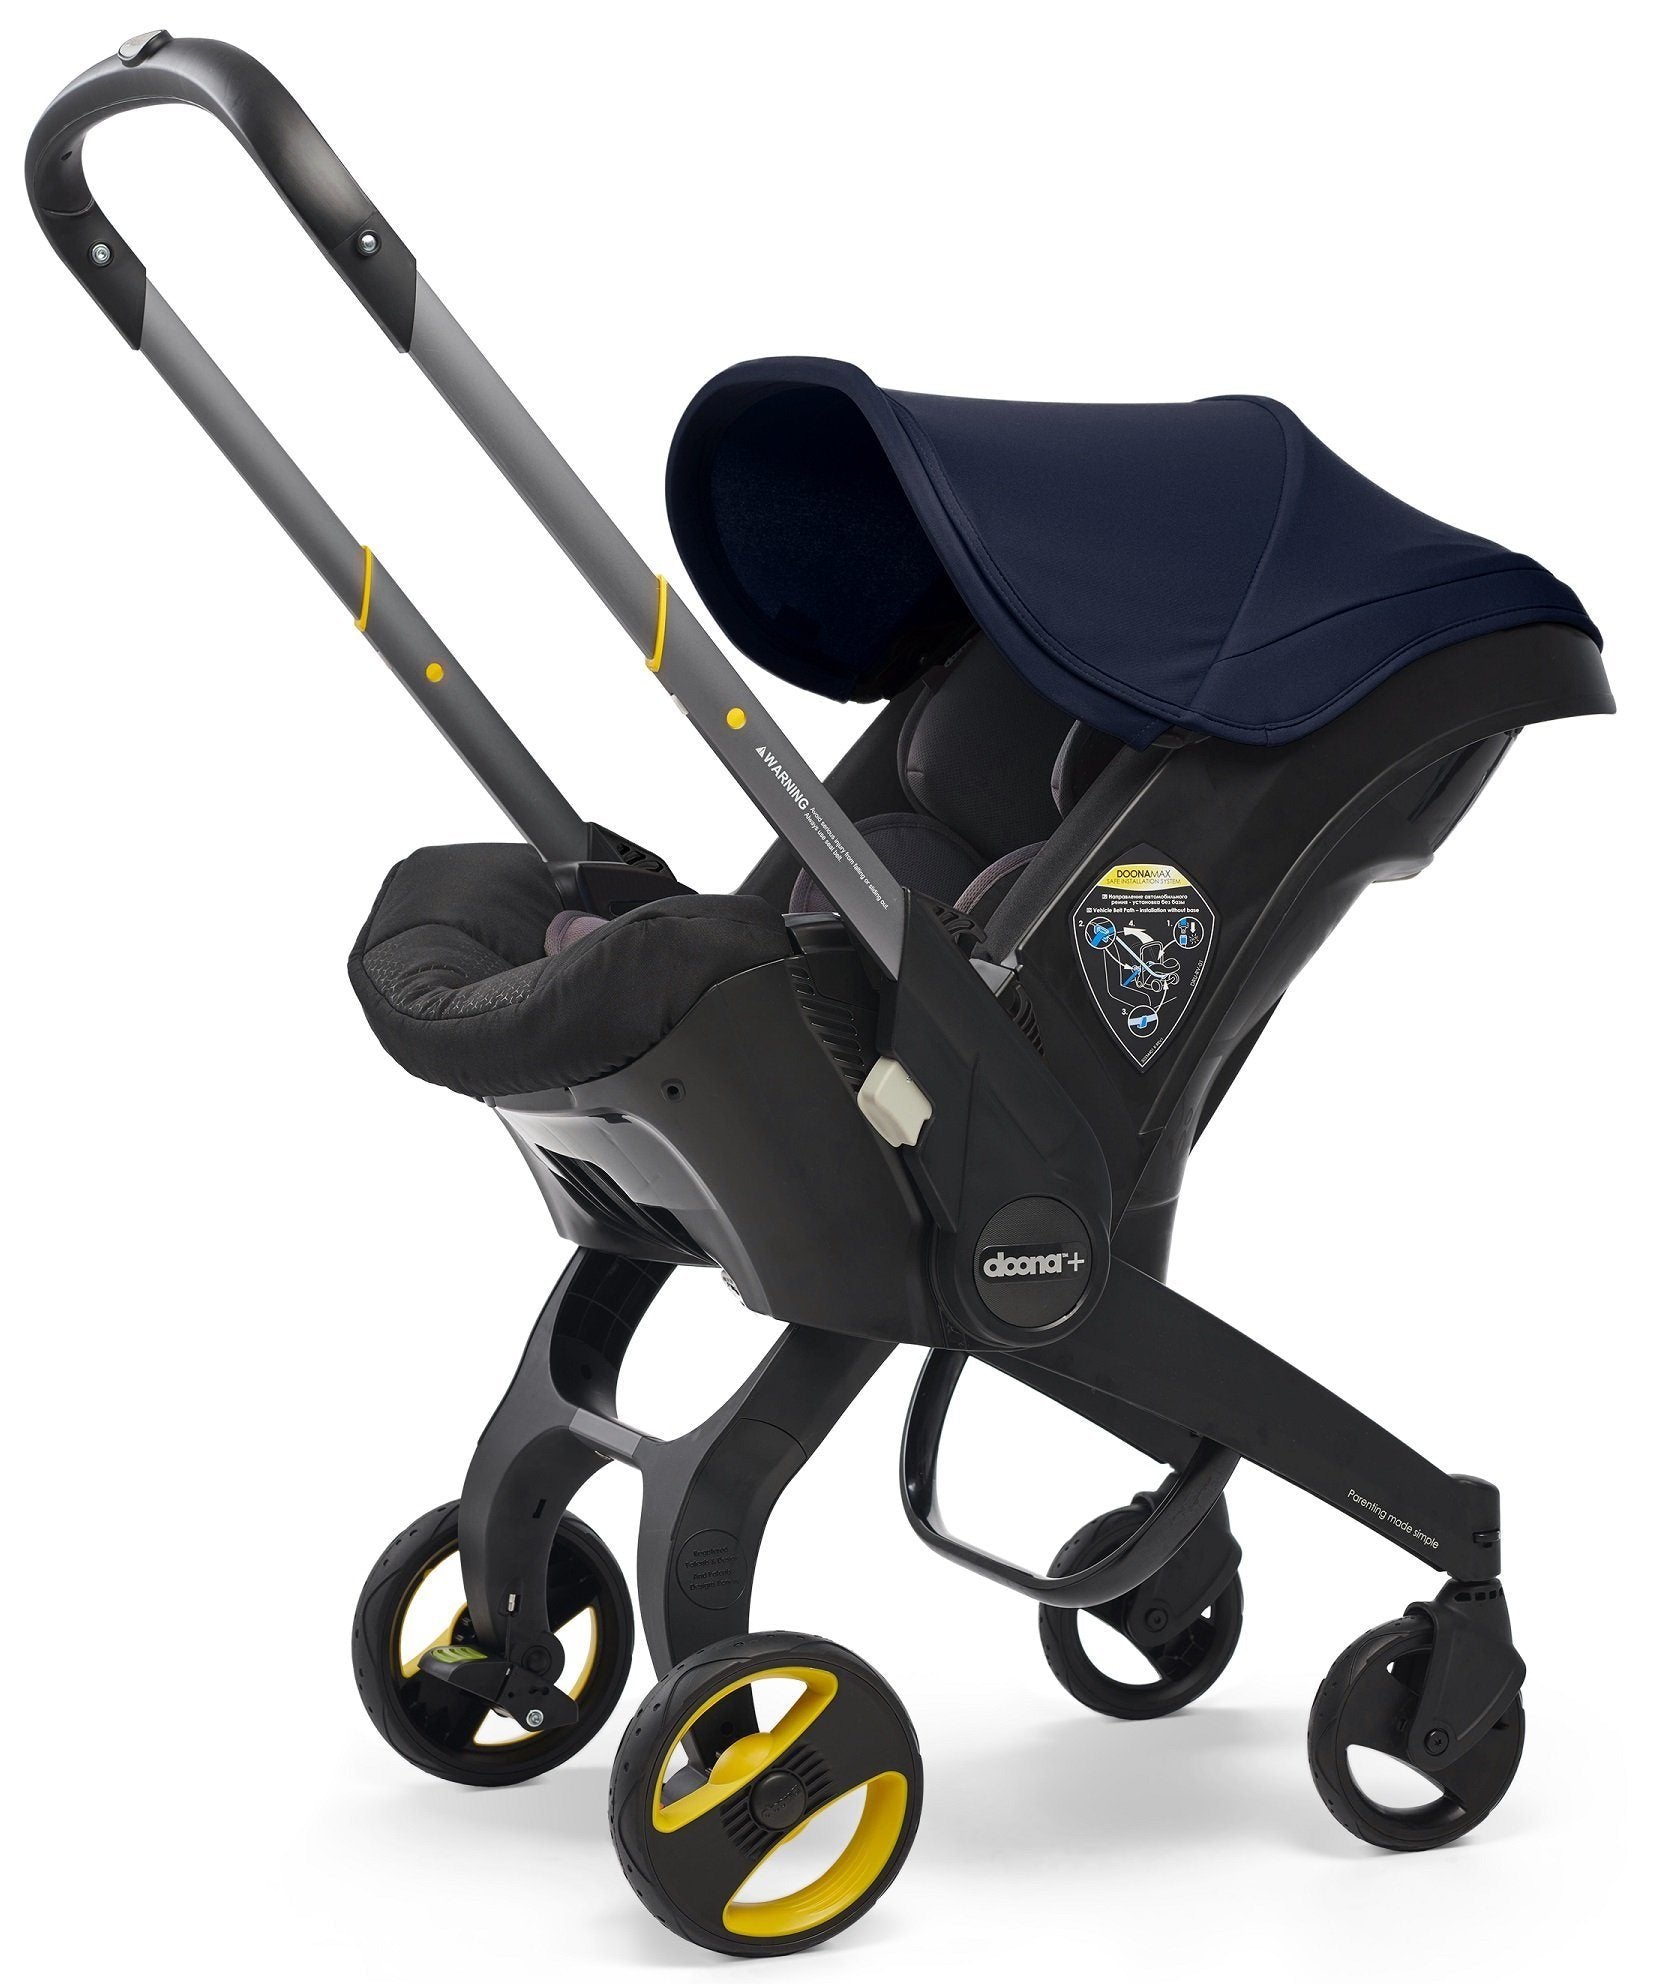 when can baby be in stroller without car seat